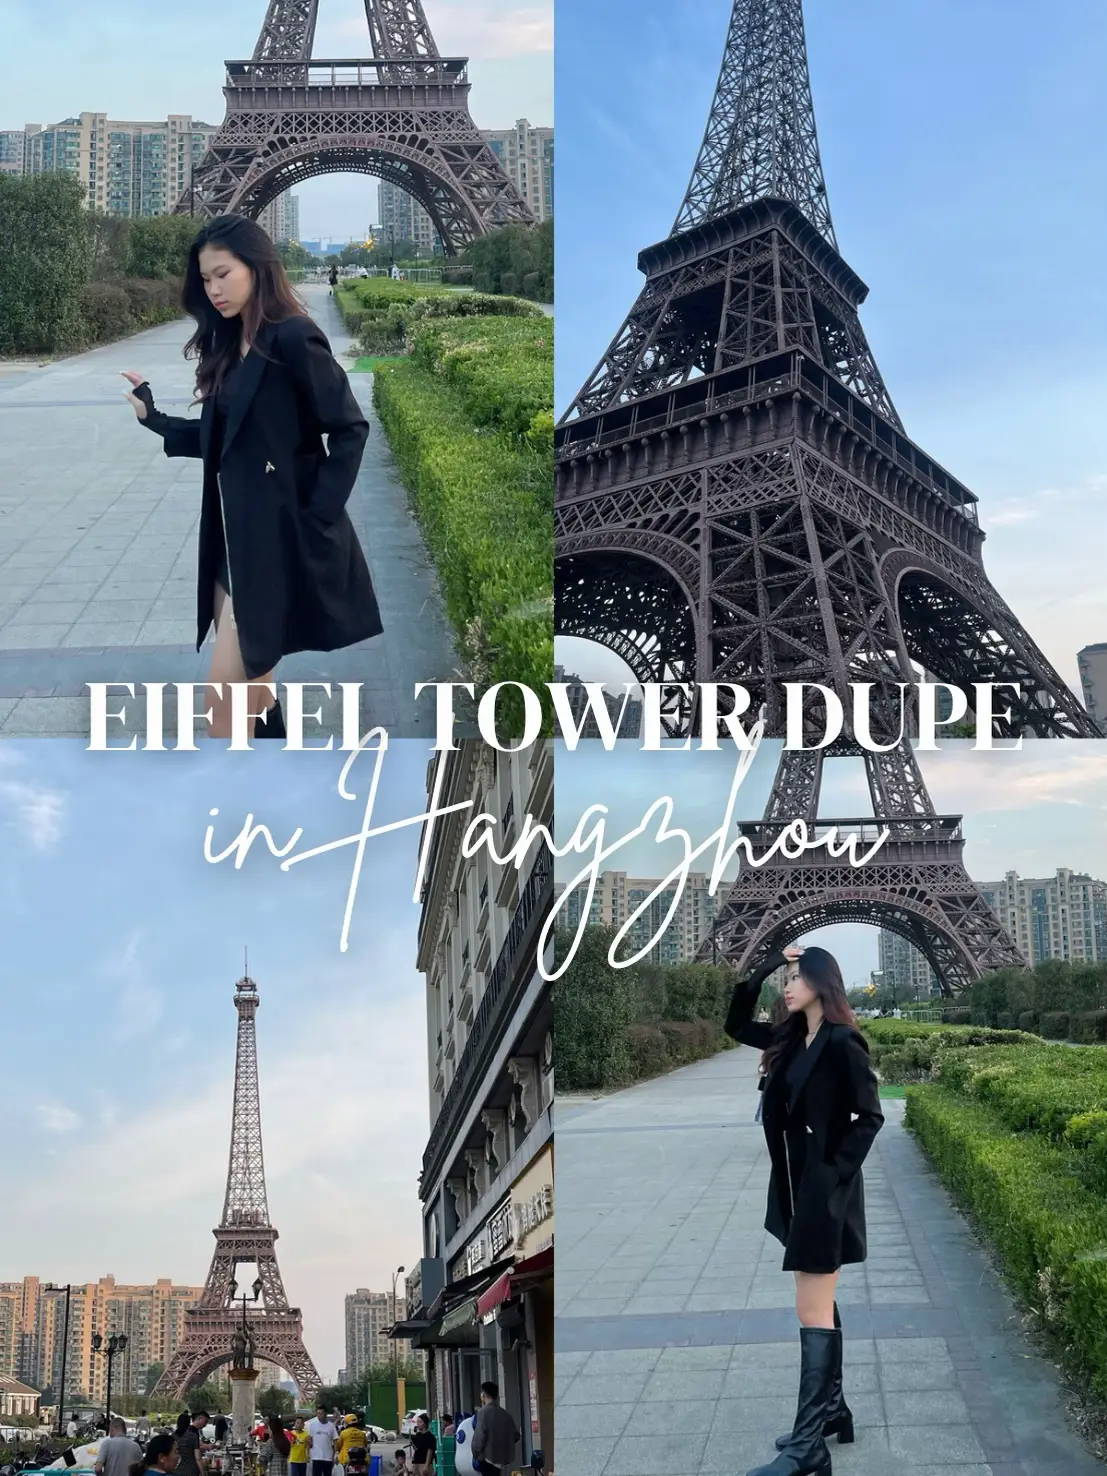 Eiffel Tower ala paris di Hangzhou China, Gallery posted by angelina